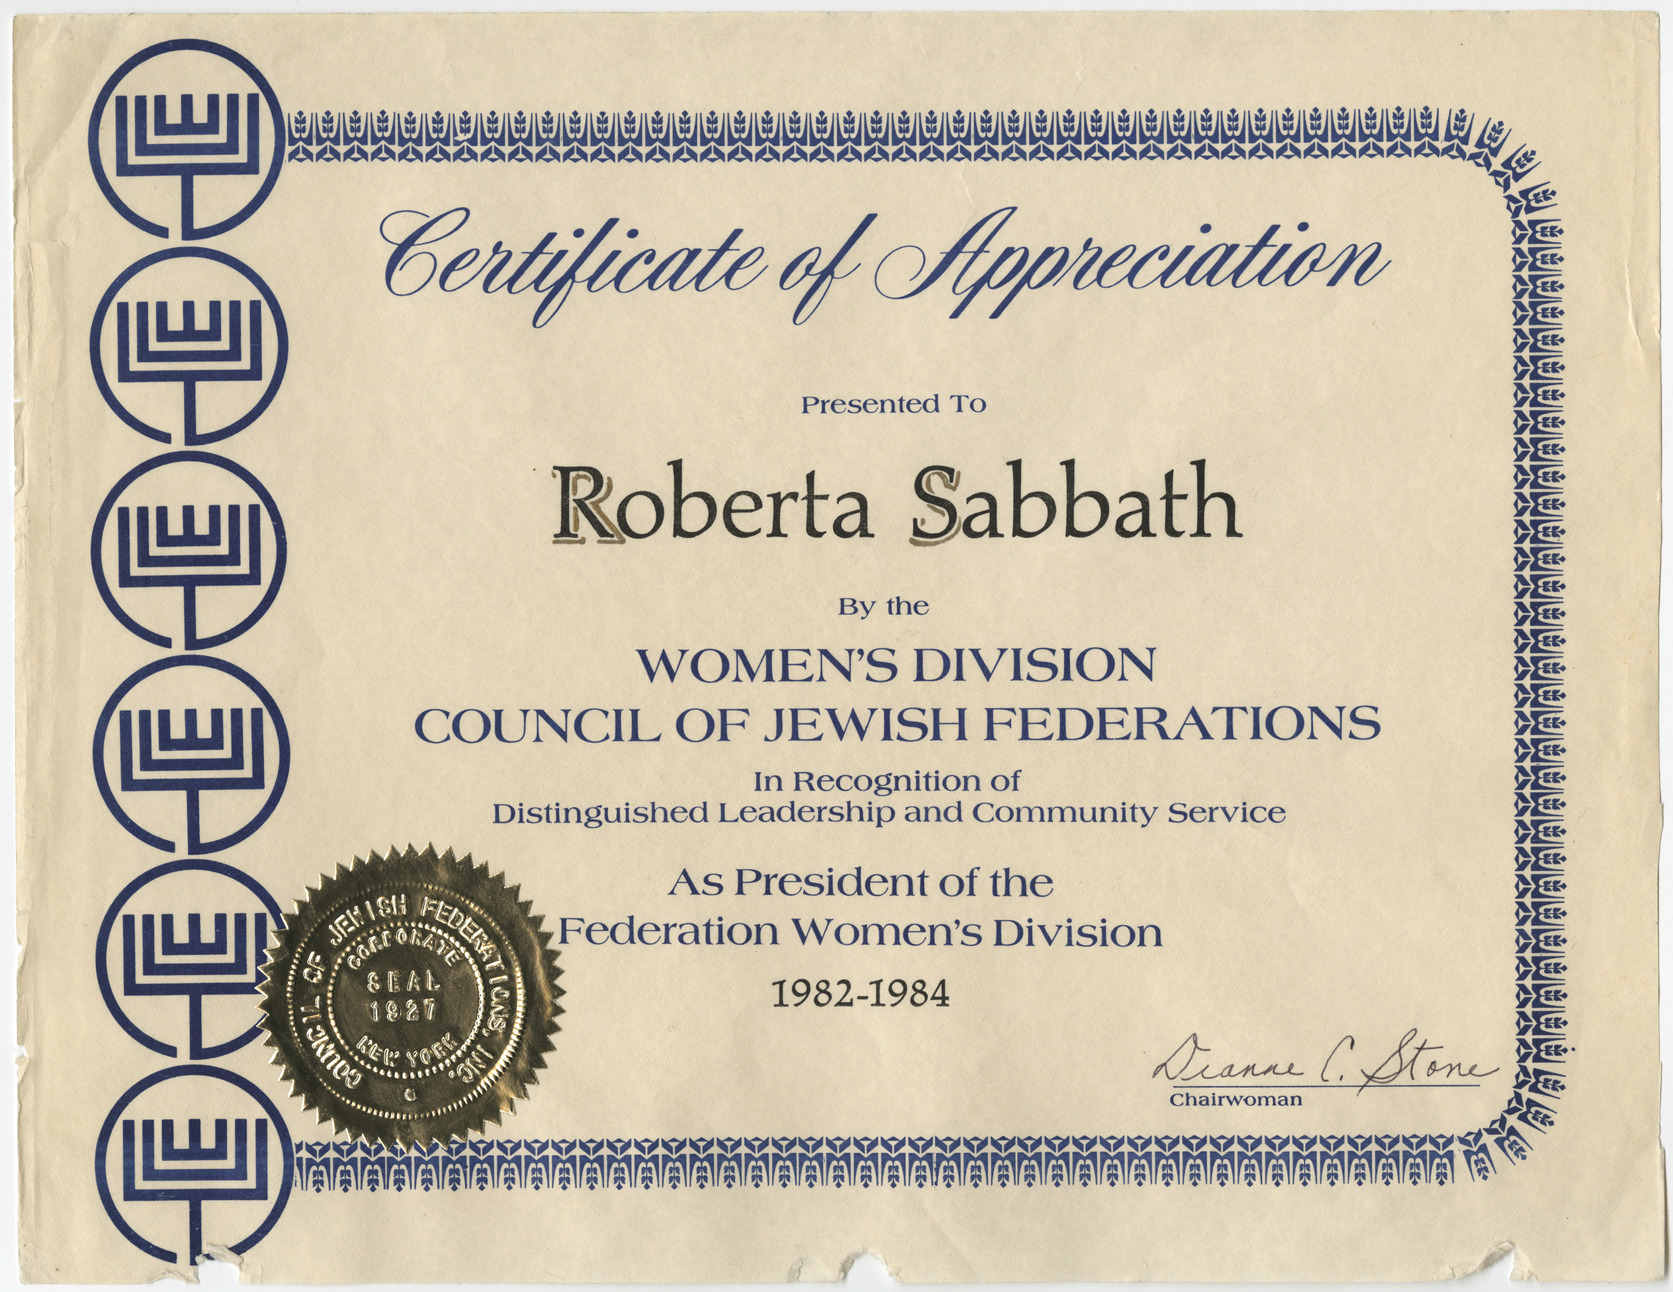 Certificate of Appreciation for Roberta Sabbath by the Women's Division Council of Jewish Federations, 1982-1984